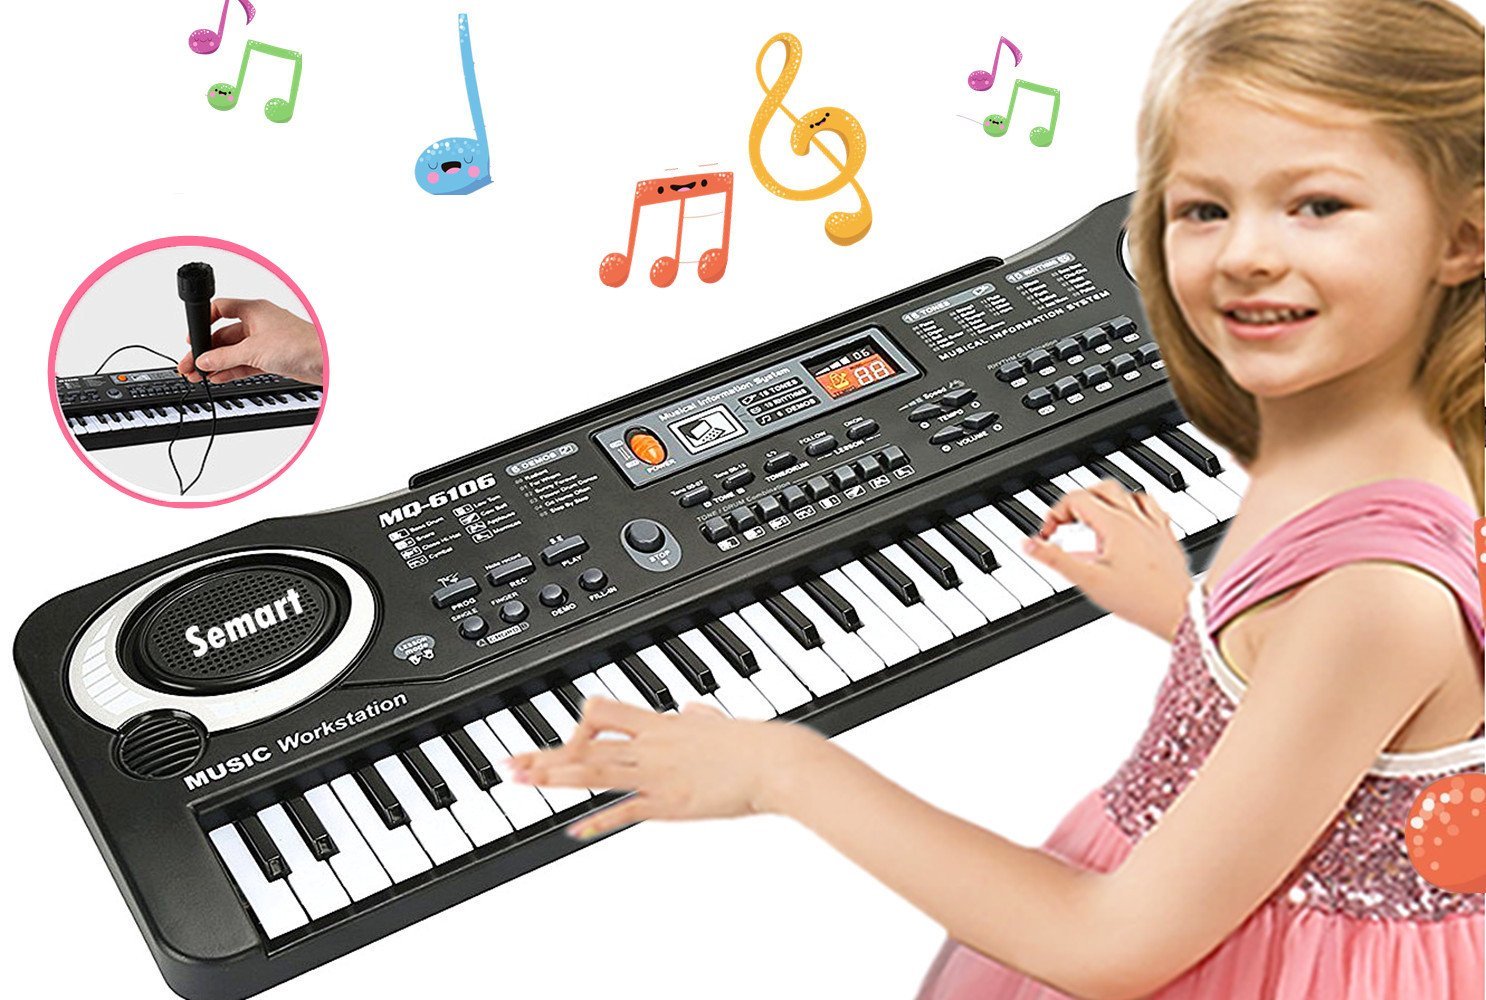 SEMART Piano Keyboard Music Piano Electric Keyboards for kids Musical Instrument USB multi-function